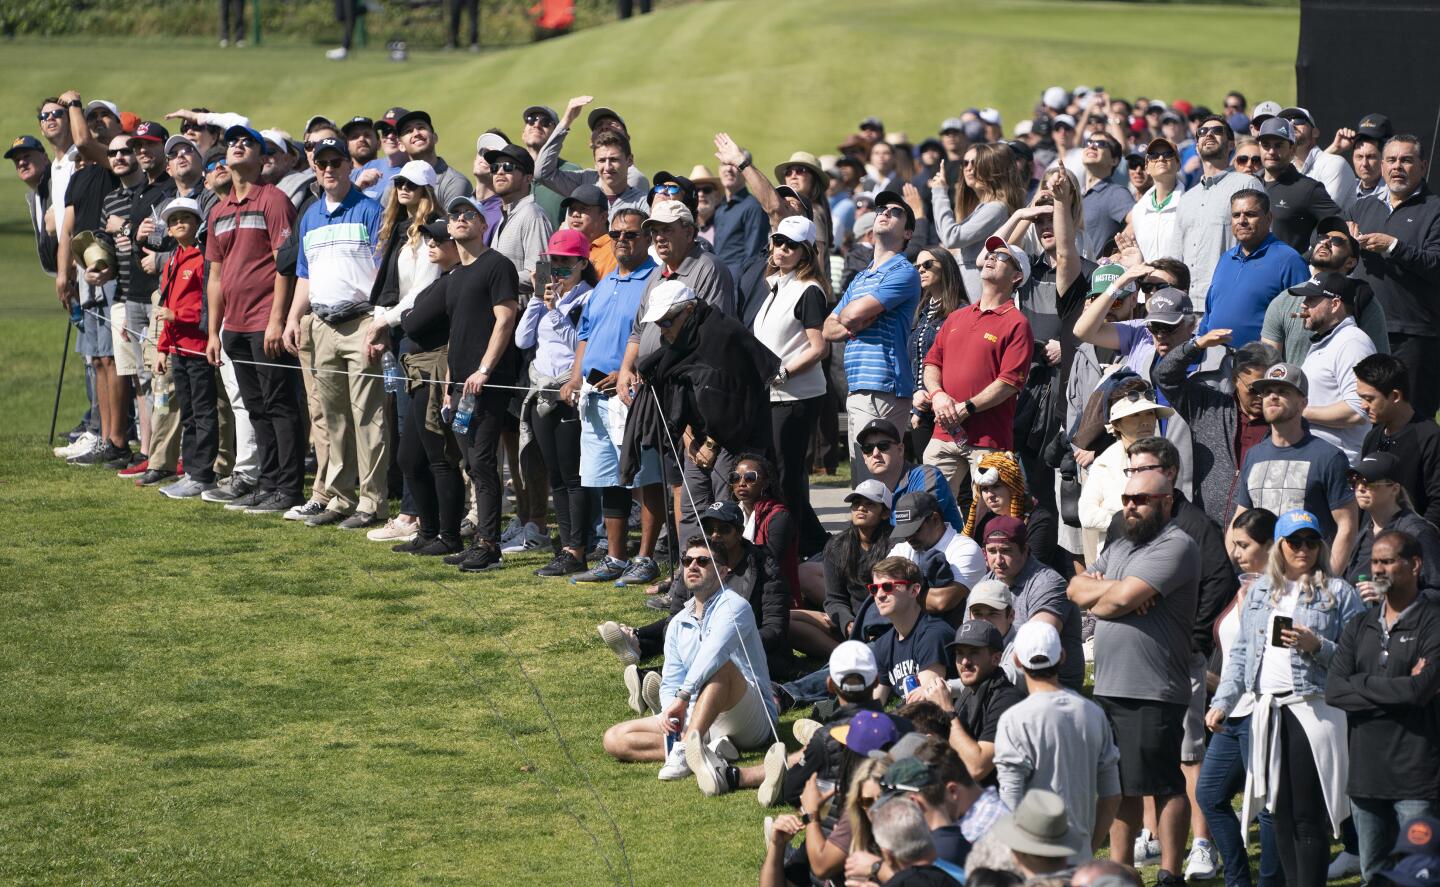 The gallery watches a drive by Tiger Woods on the sixth hole during the third round of the Genesis Invitational at Riviera Country Club on Feb. 15, 2020.